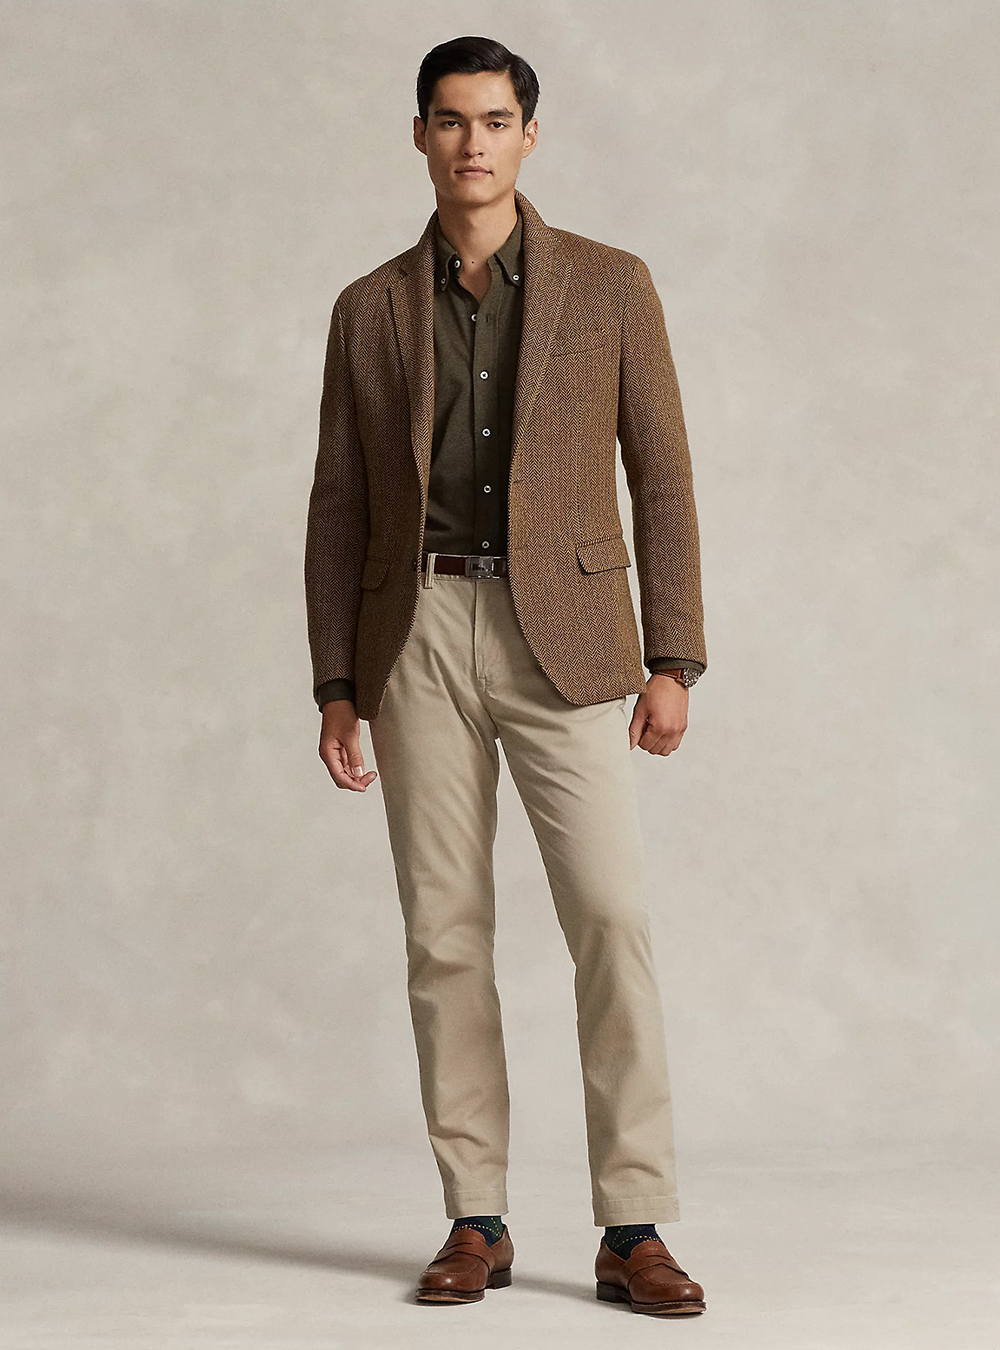 brown blazer, button-down olive shirt, tan chinos, and brown loafers